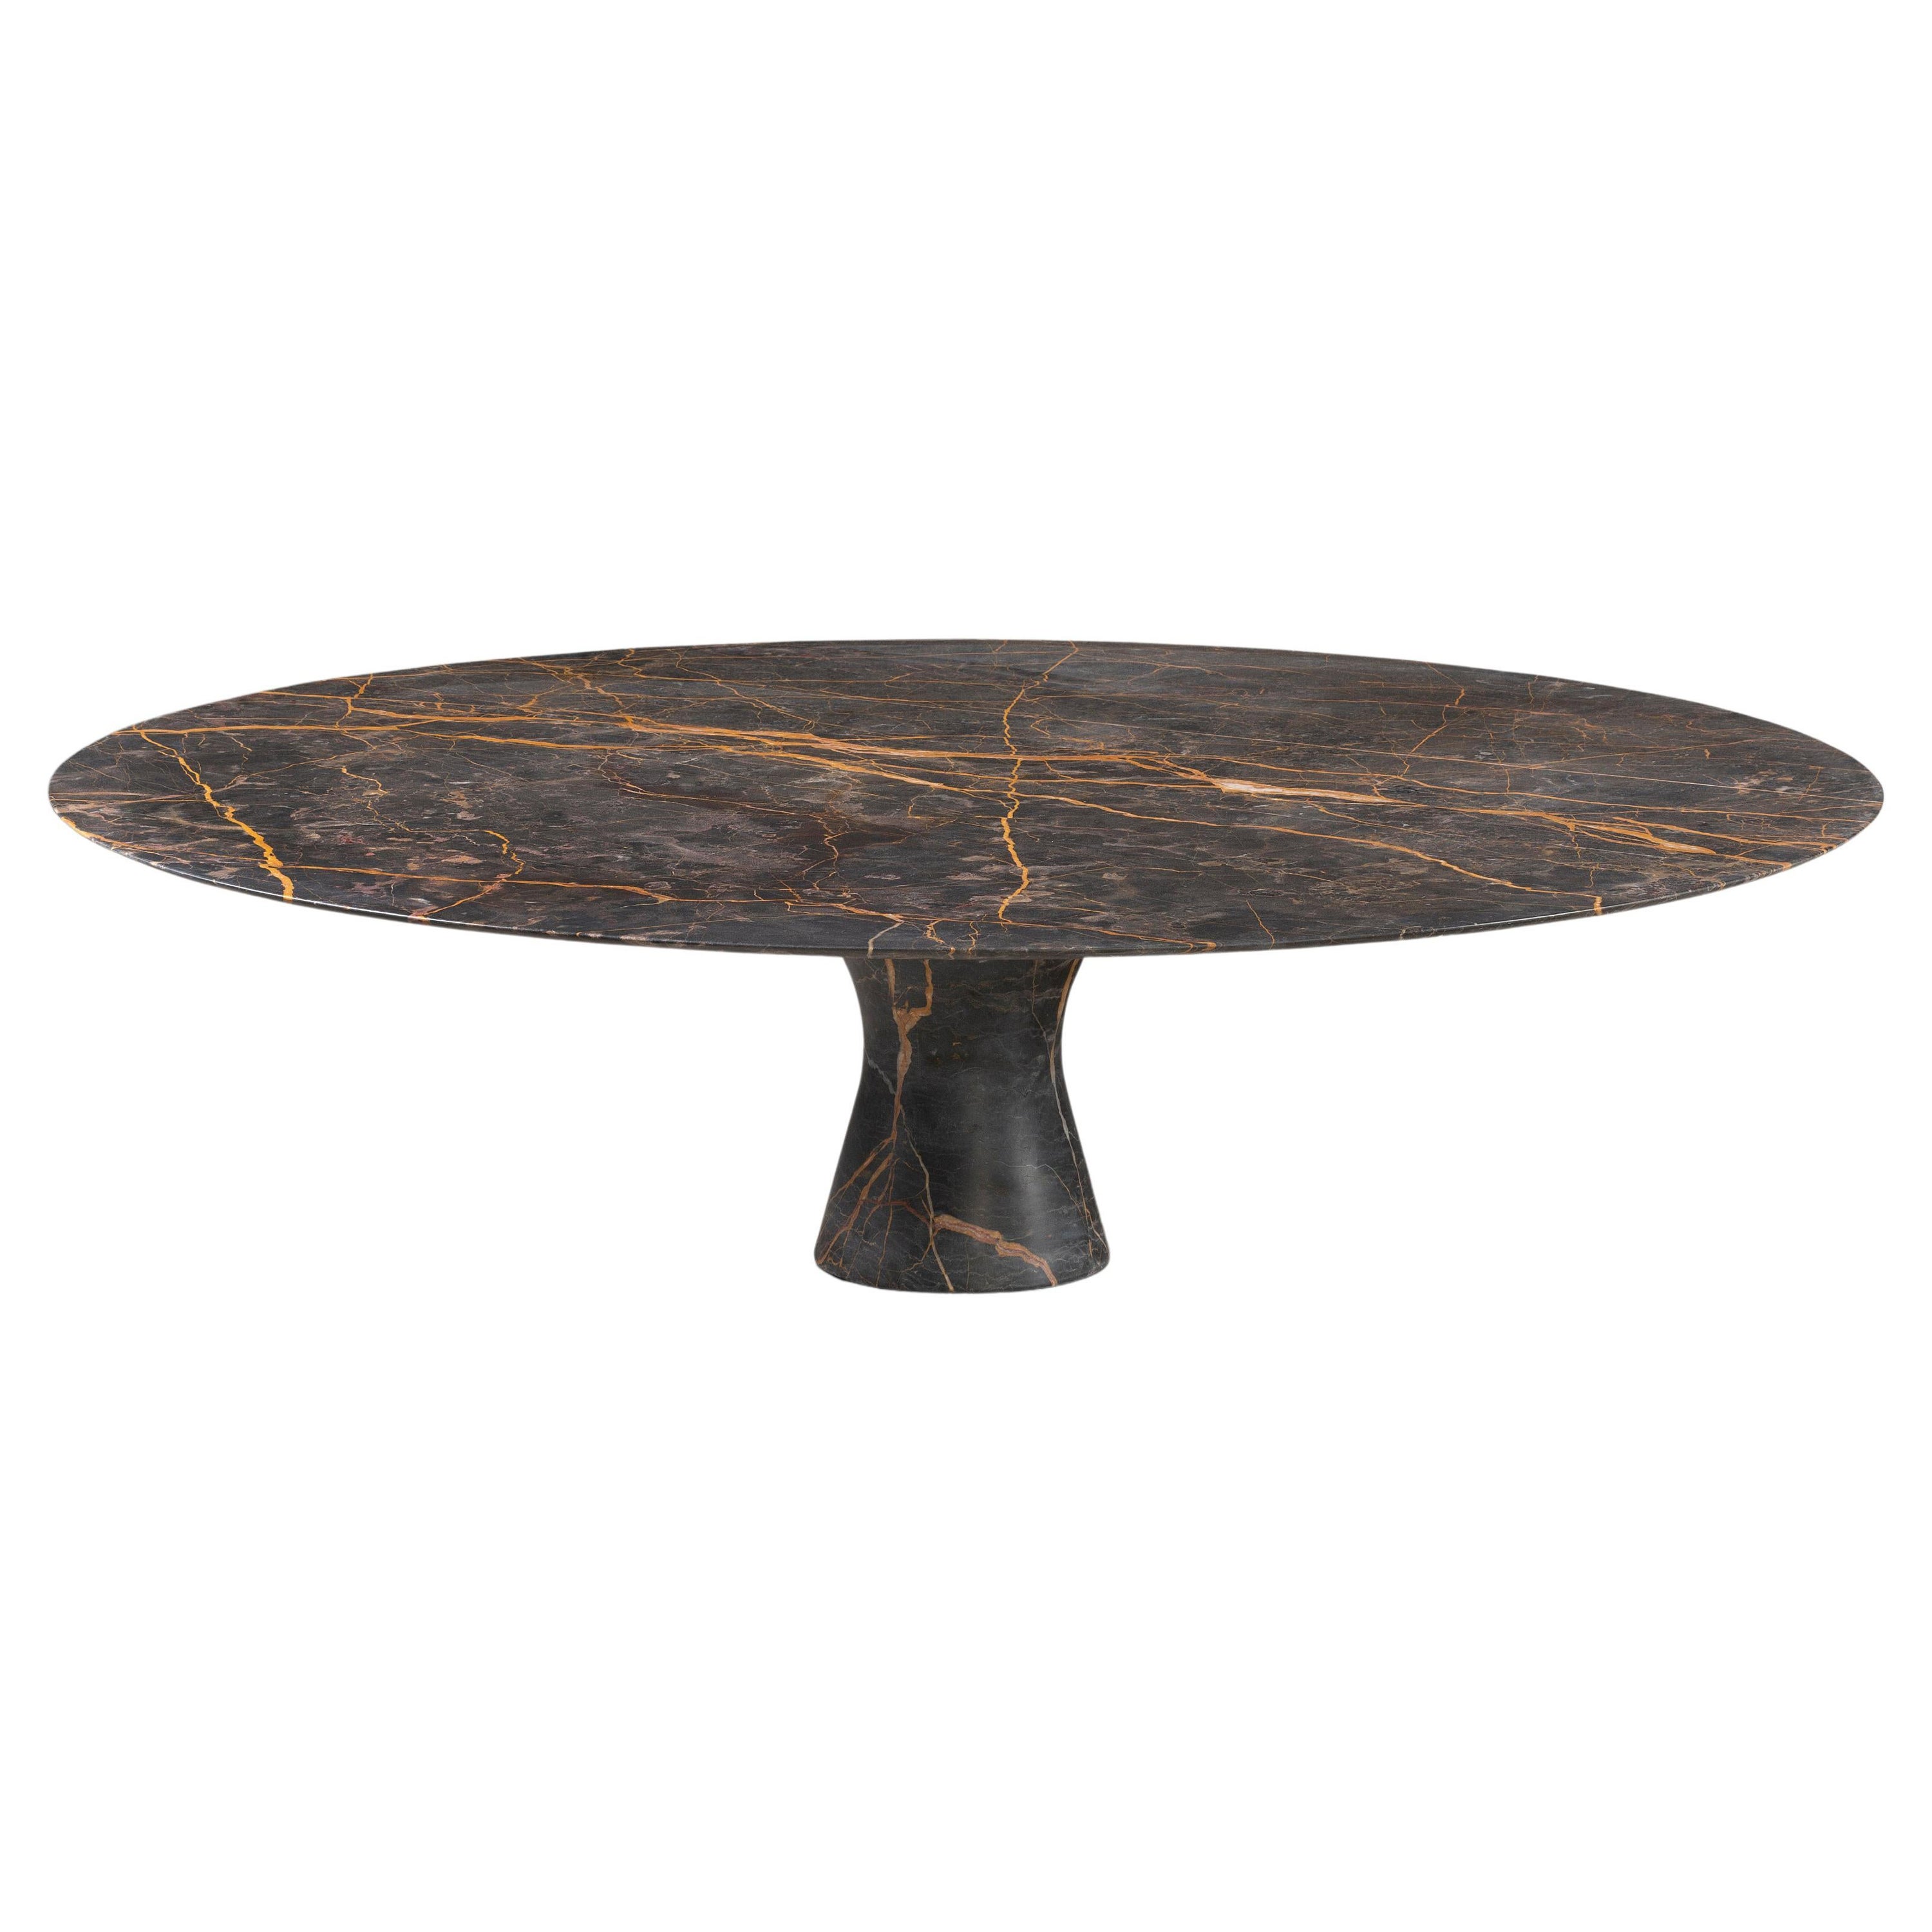 Port Saint Laurent Refined Contemporary Marble Oval Low Table 130/27 For Sale